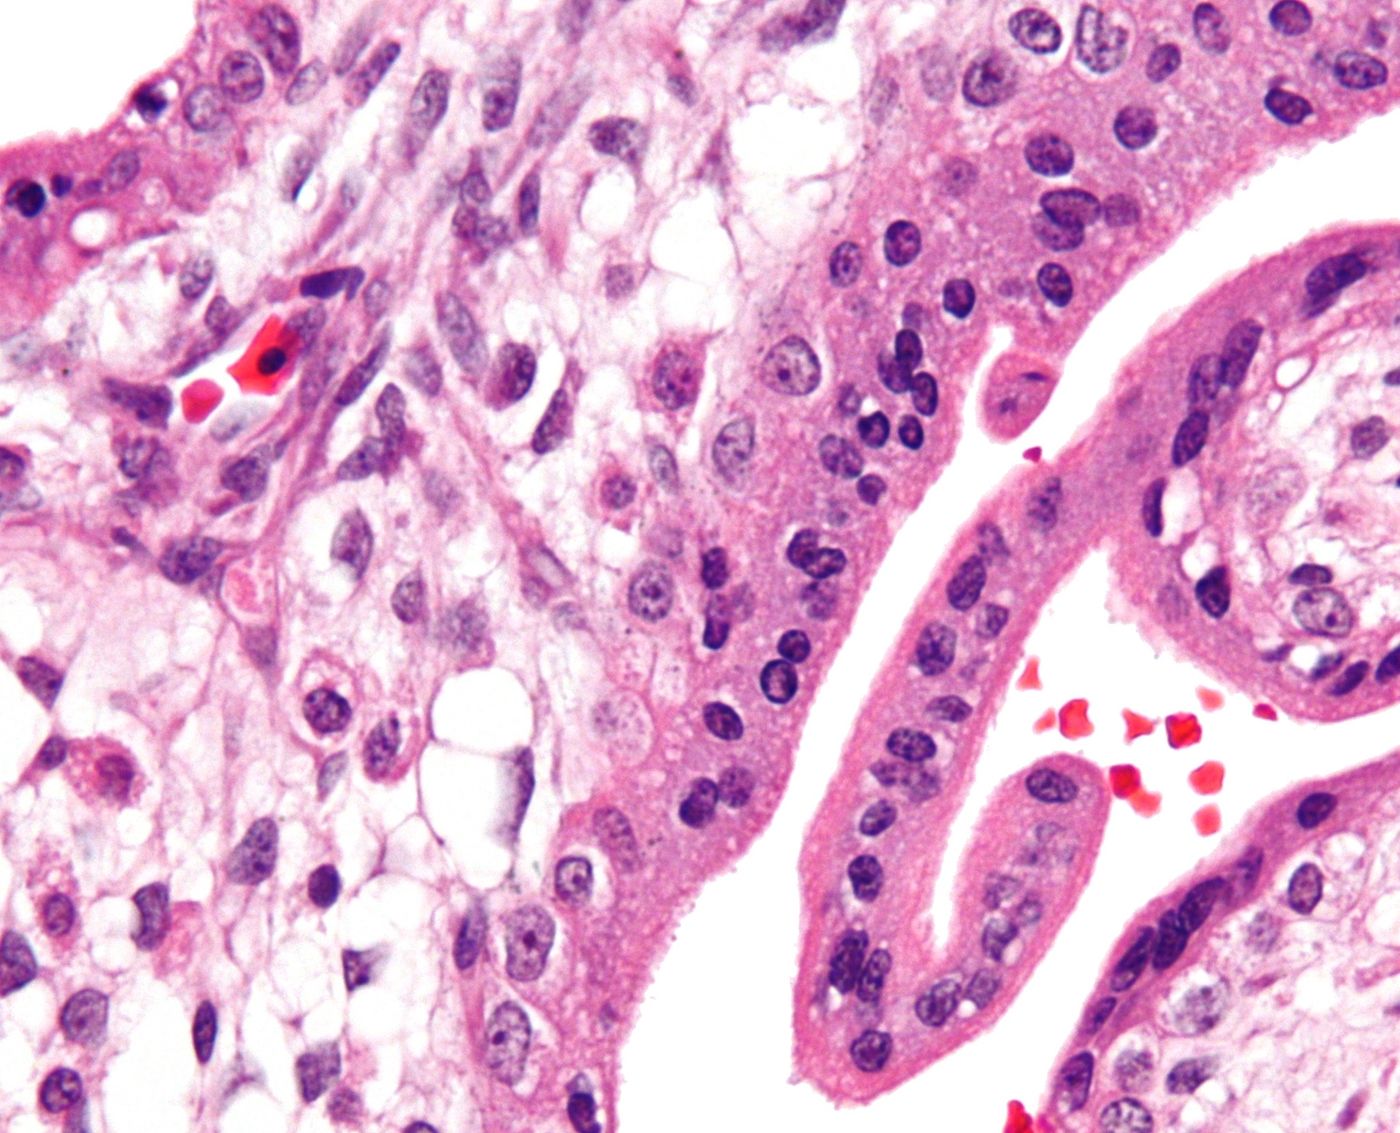 Micrograph showing chorionic villi of placenta with Hofbauer cells